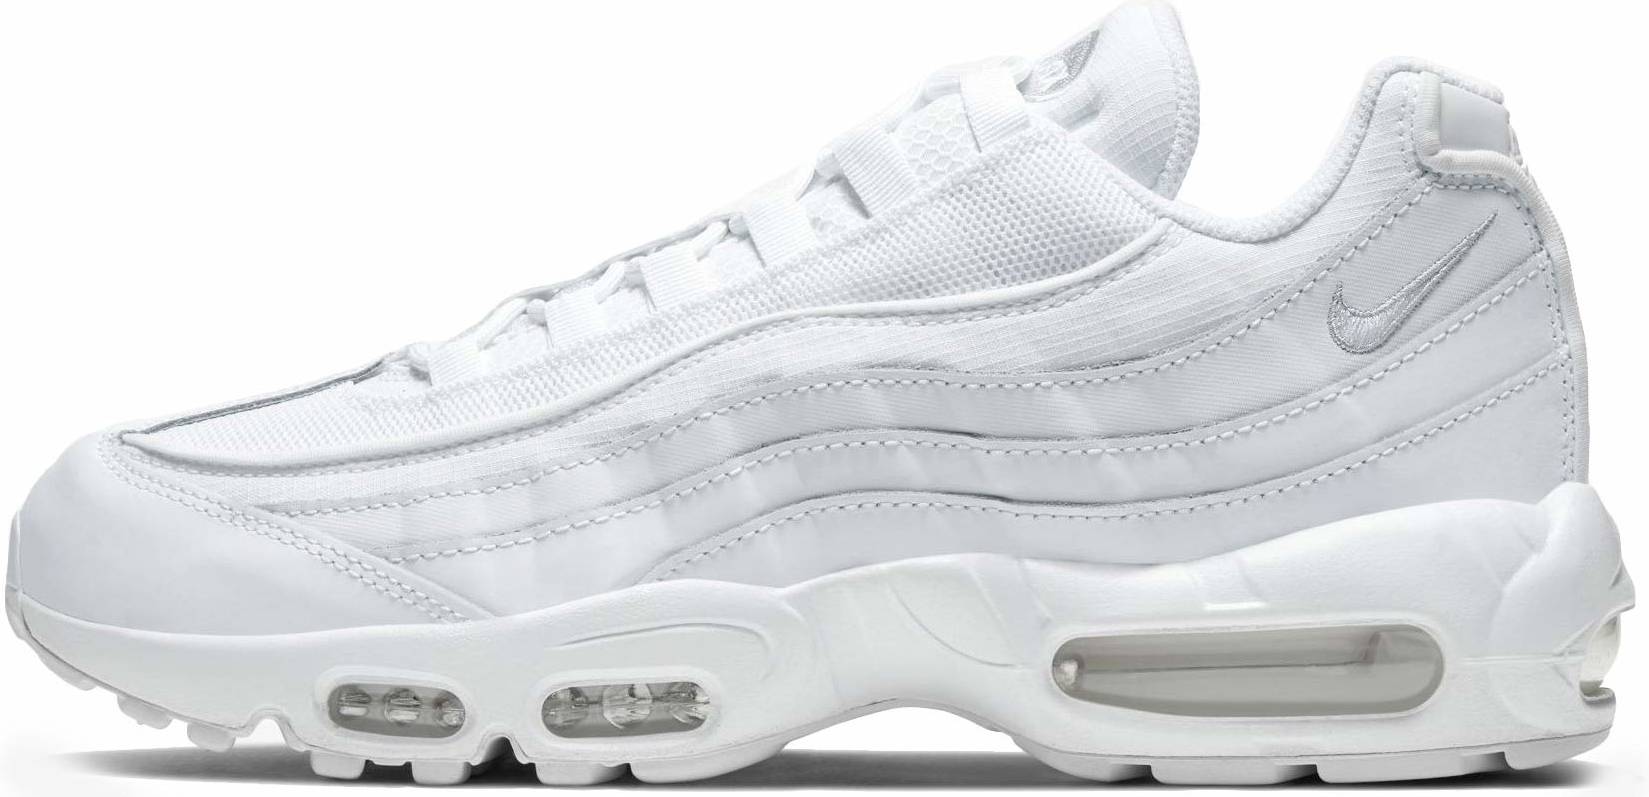 Nike Air Max 95 Essential sneakers in 10 colors (only $115 ...